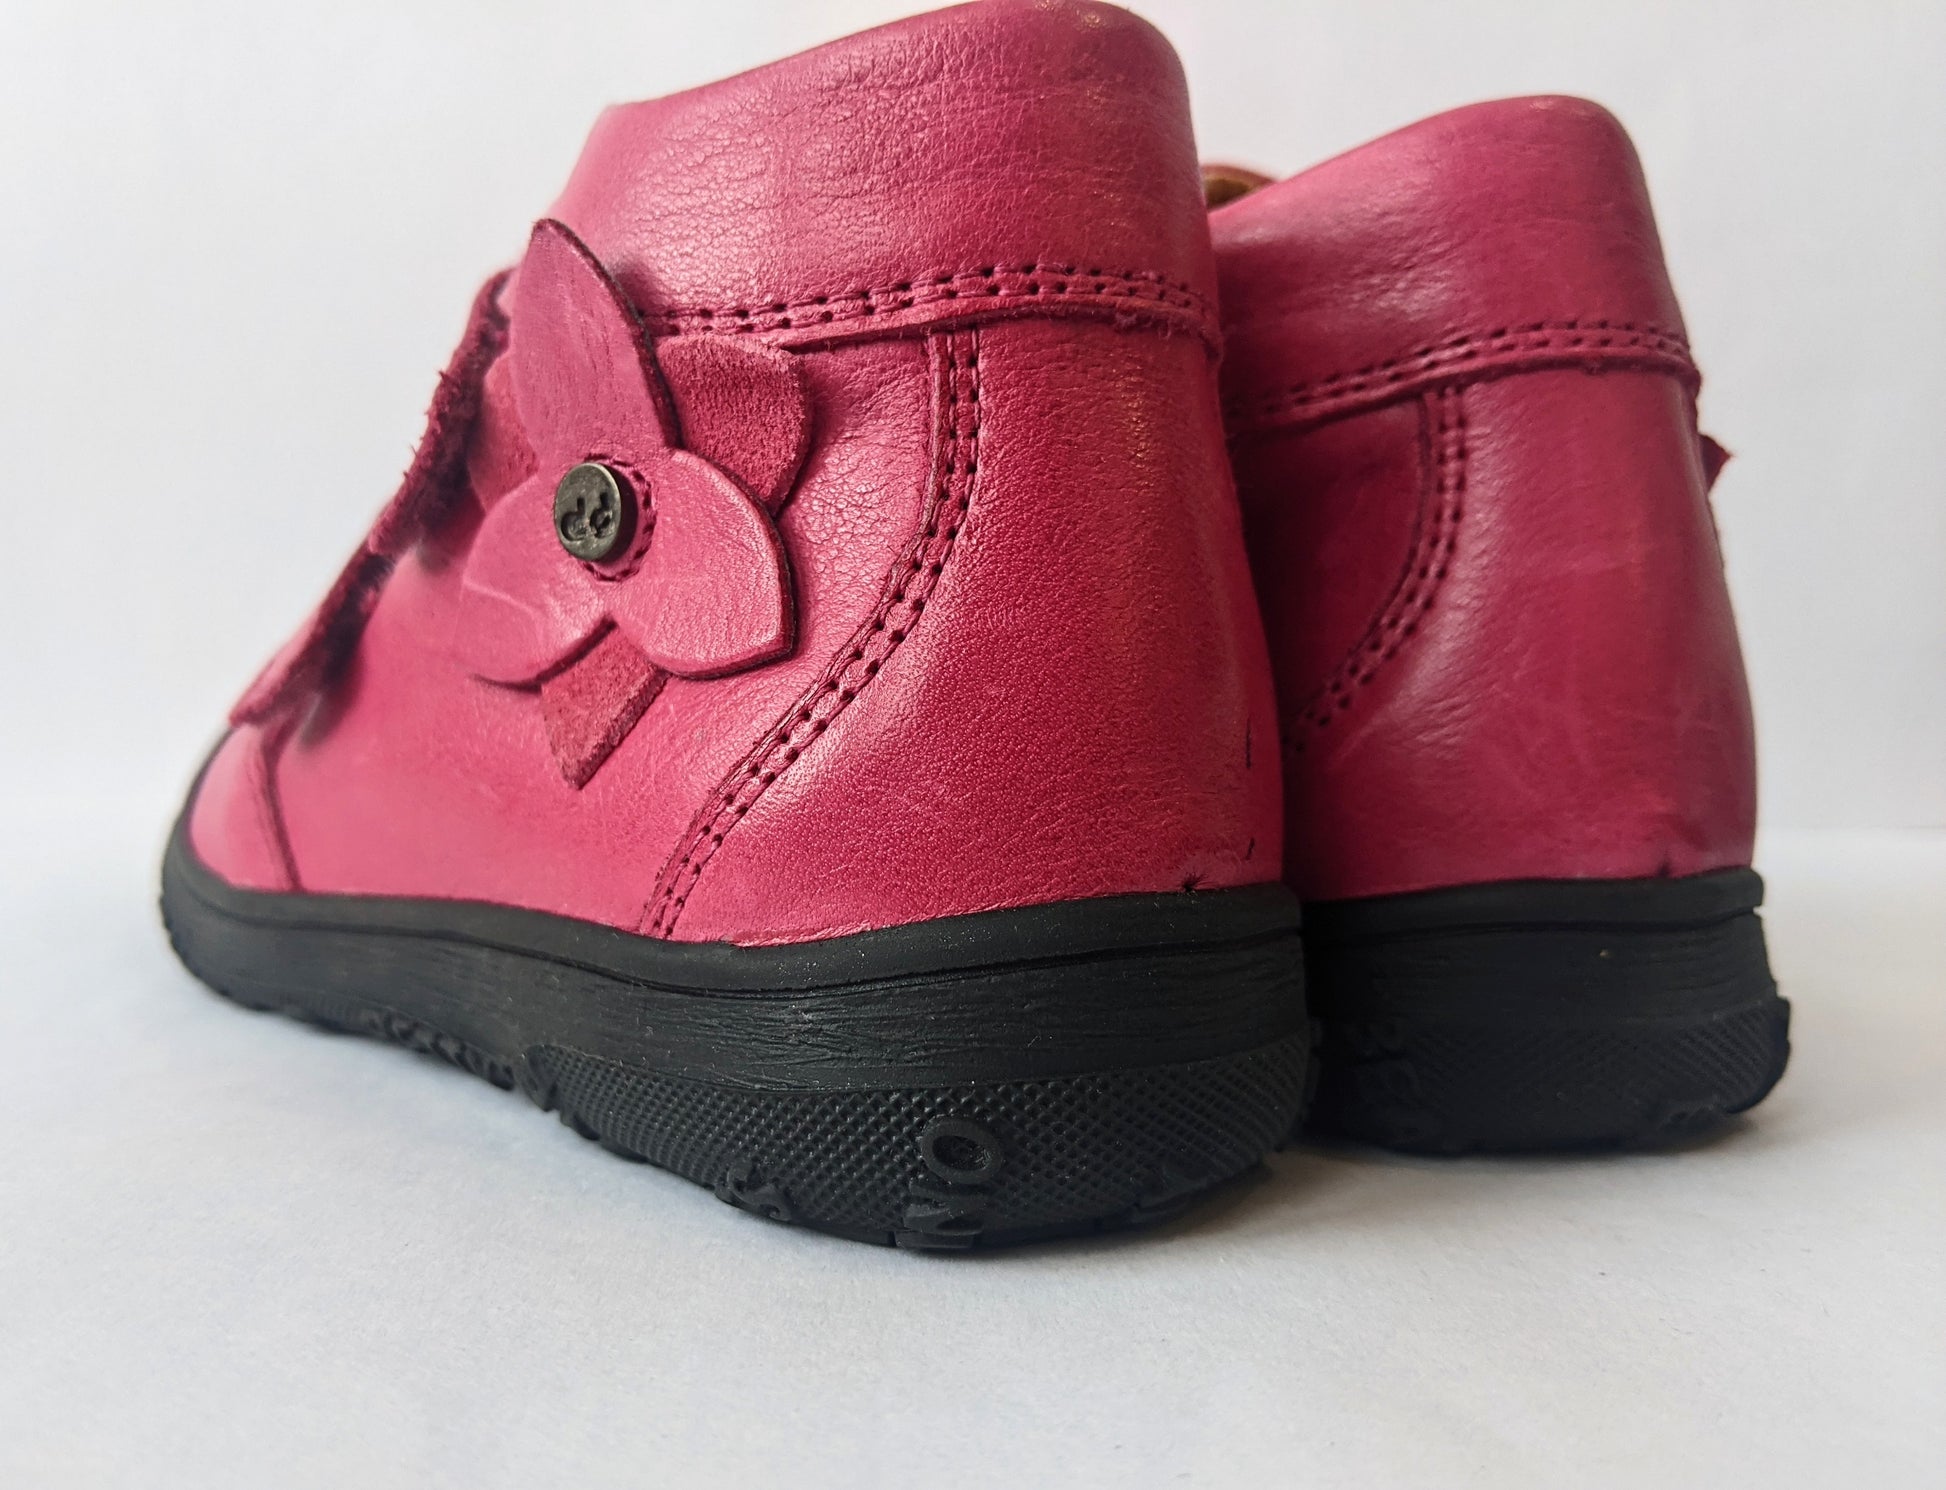 A pair of girls ankle boots by Froddo, style G2130072, in Fuchsia leather with double velcro fastening. Back view.